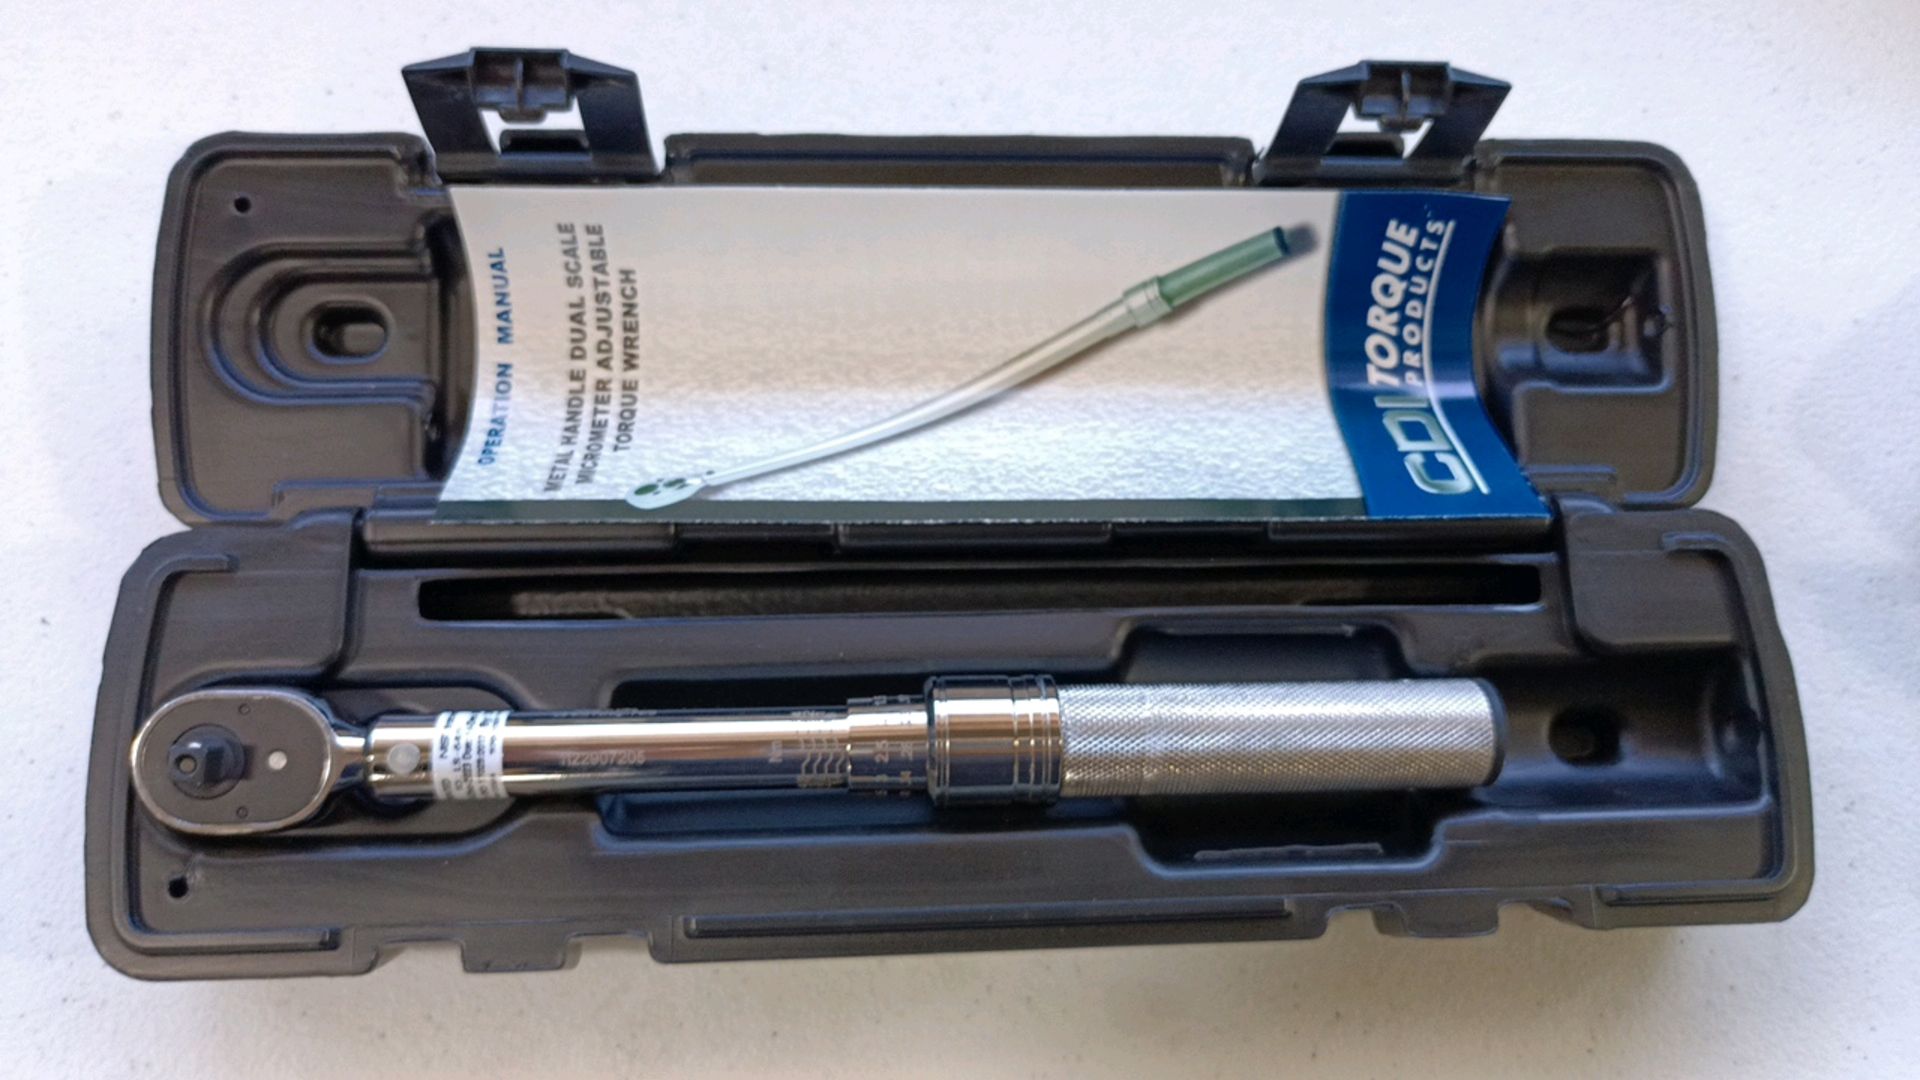 Micrometer Torque Wrenches - Image 2 of 4